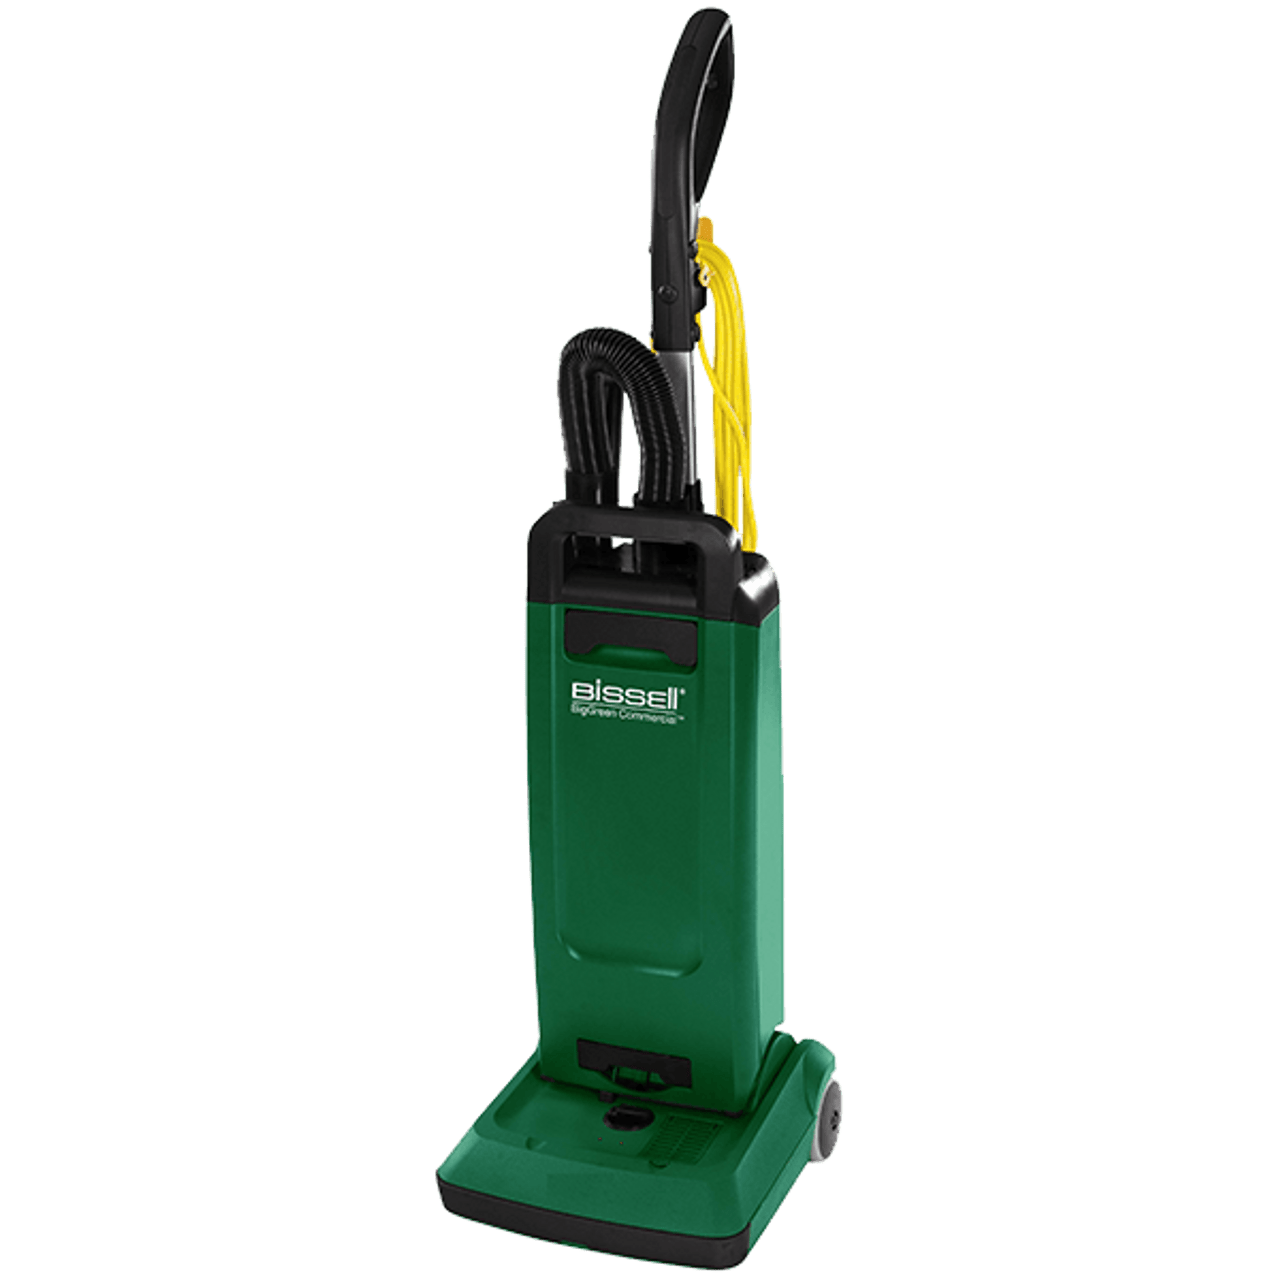 bissell Bissell Commercial 12" Single Motor Commercial Bagged Upright Vacuum Cleaner with On-Board Tools